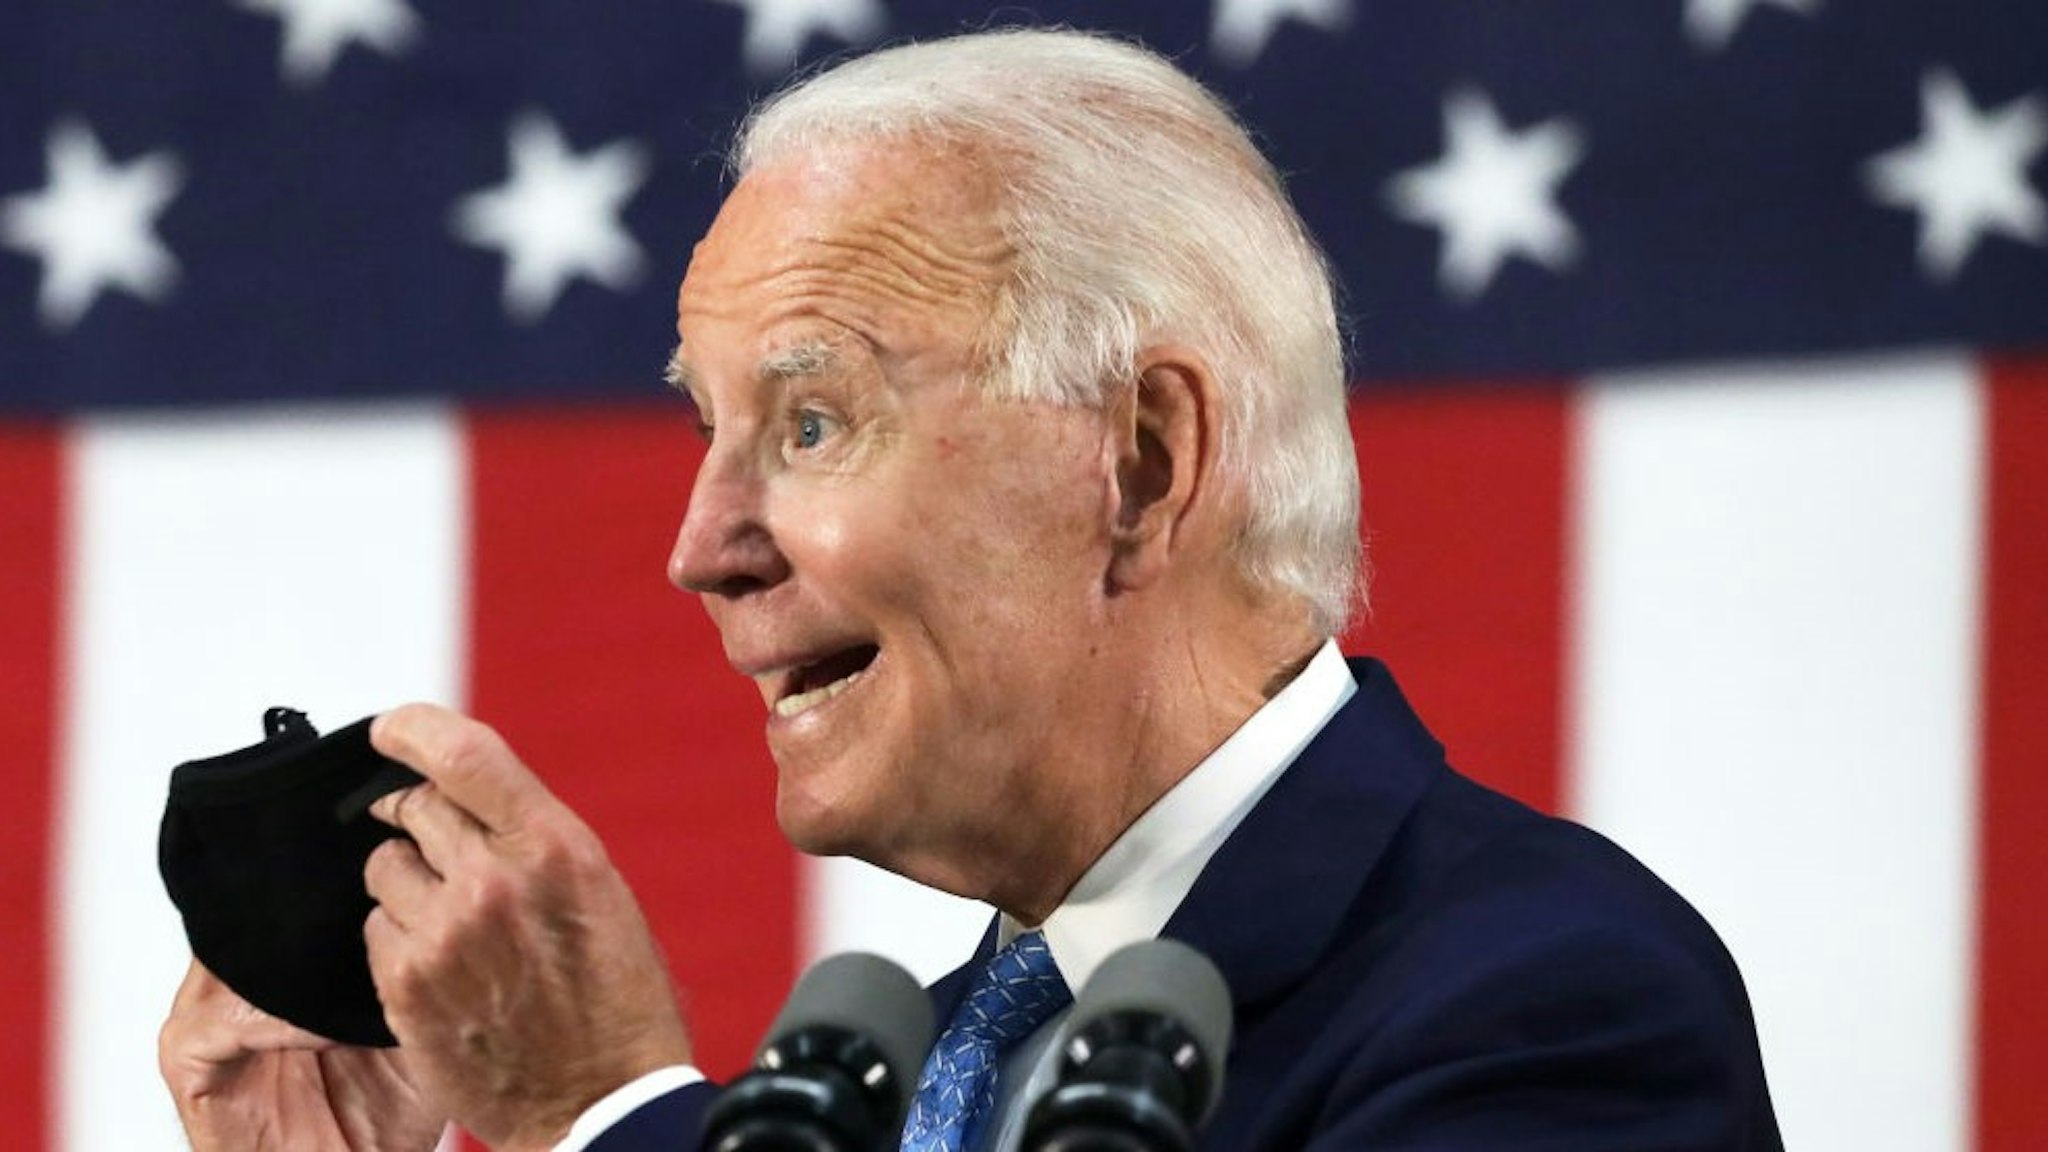 WILMINGTON, DELAWARE - JUNE 30: Democratic presidential candidate, former Vice President Joe Biden holds up a mask as he speaks during a campaign event June 30, 2020 at Alexis I. Dupont High School in Wilmington, Delaware. Biden discussed the Trump Administration’s handling of the COVID-19 pandemic. (Photo by